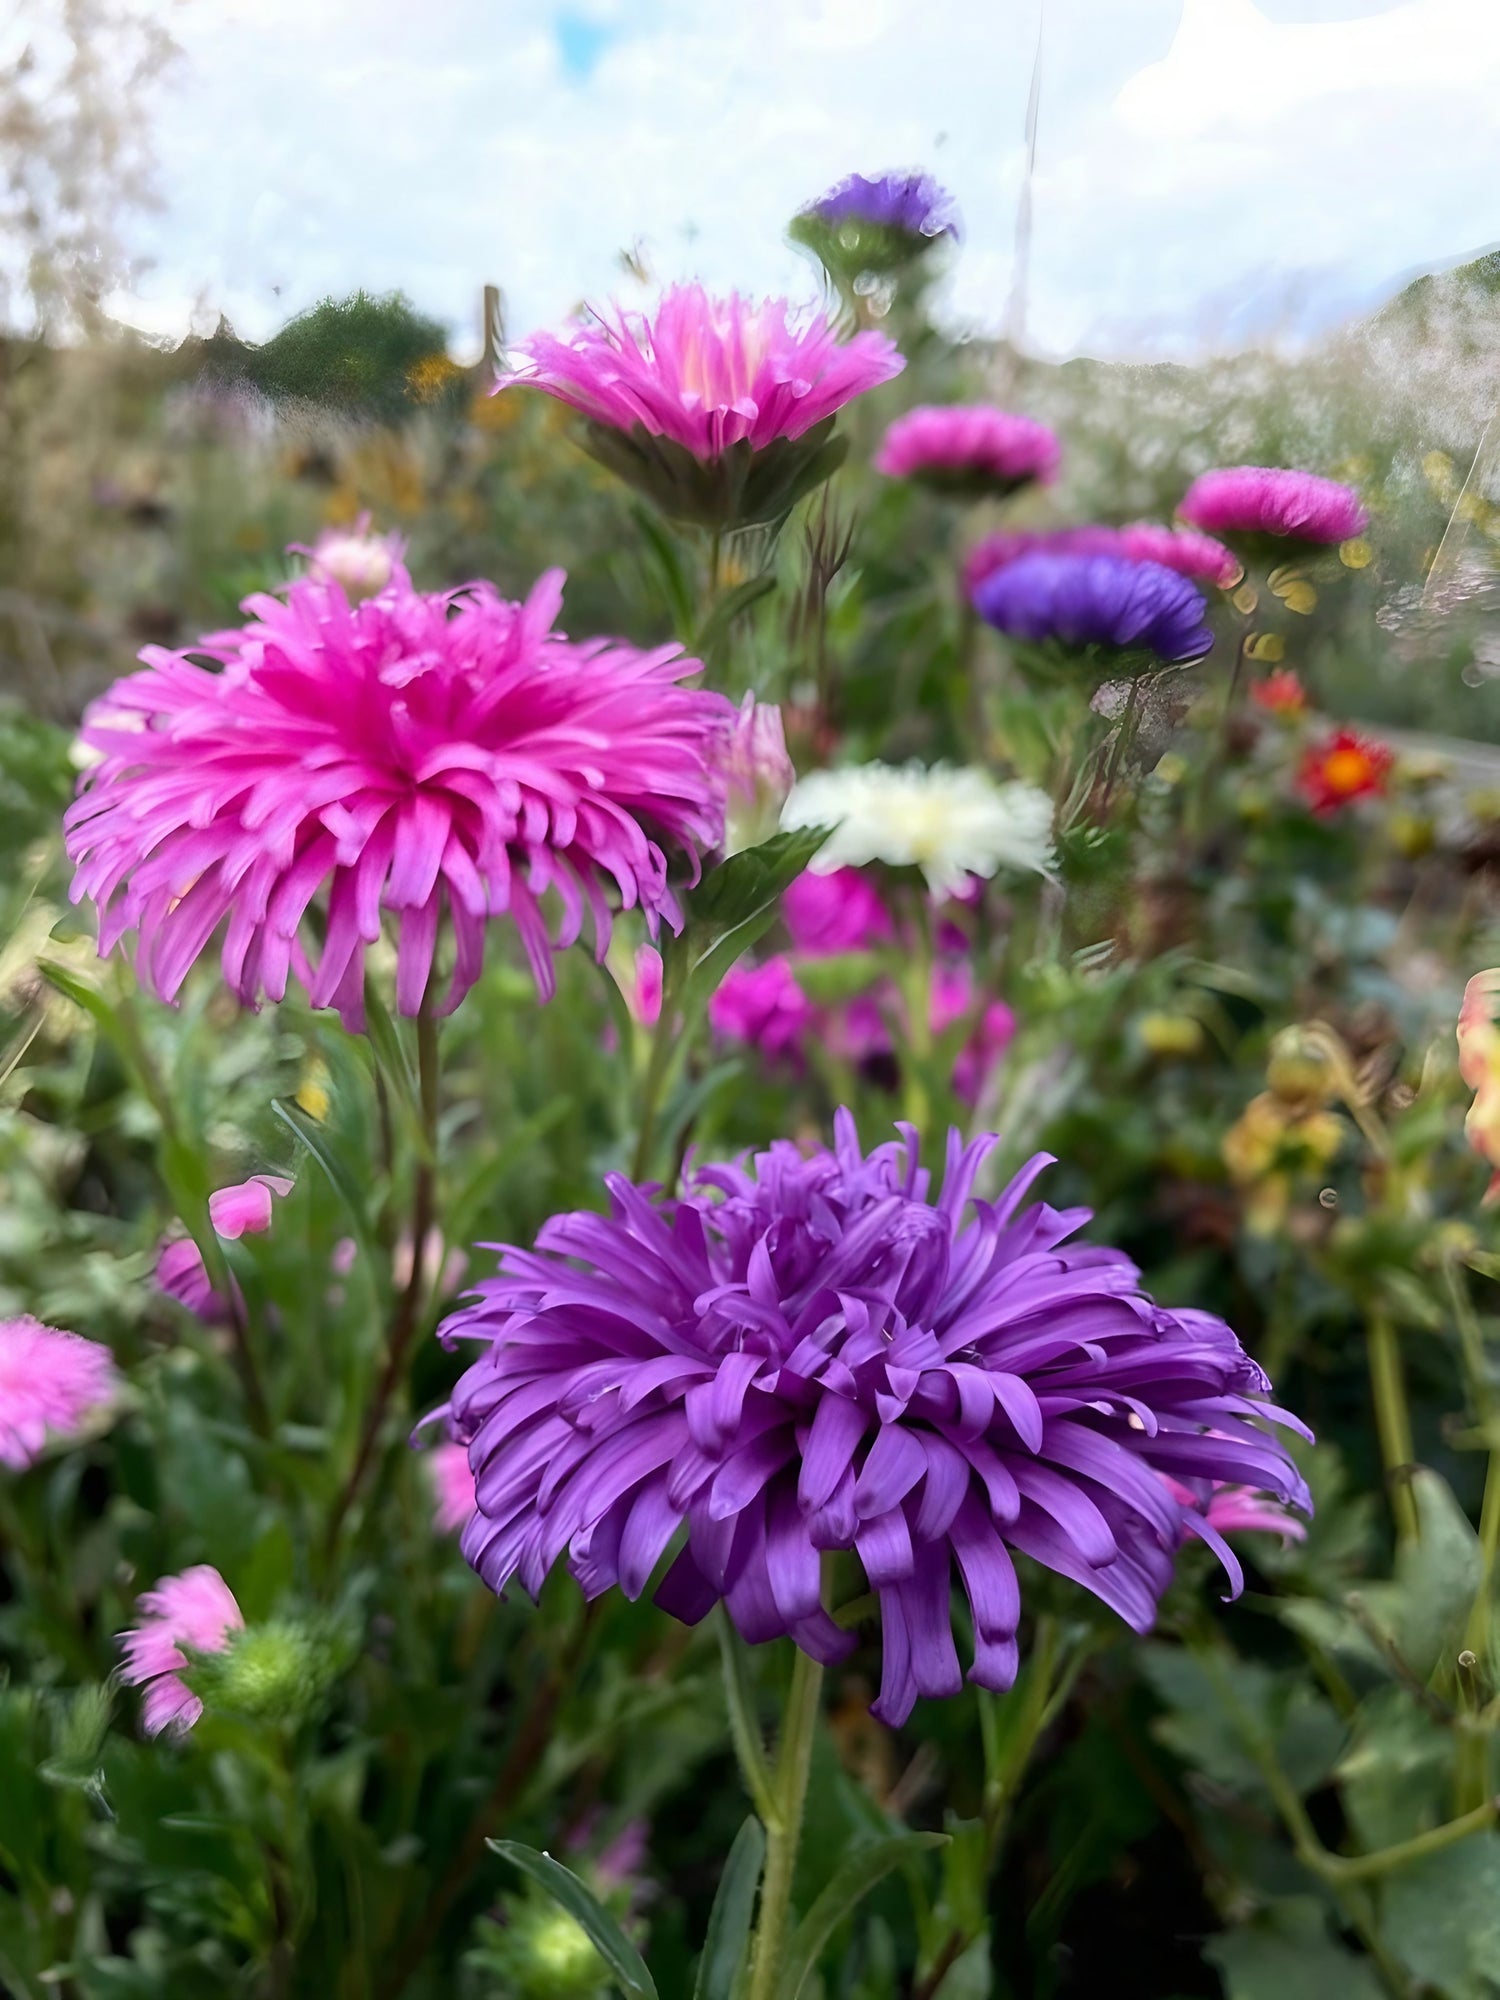 Lush Aster Ostrich Plume blossoms in a well-maintained garden